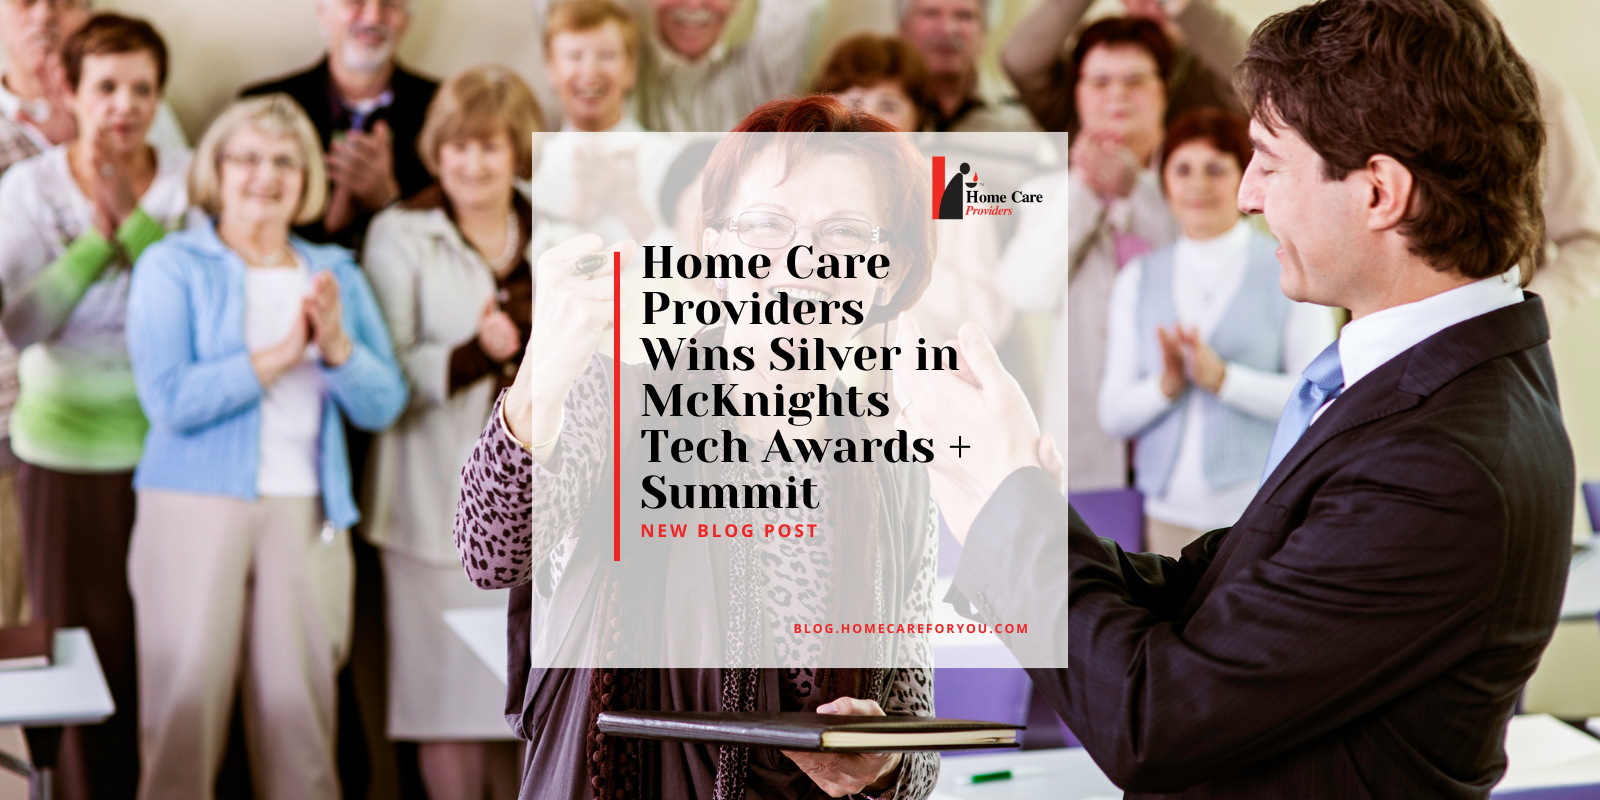 Home Care Providers Wins Silver at McKnights Tech Awards + Summit